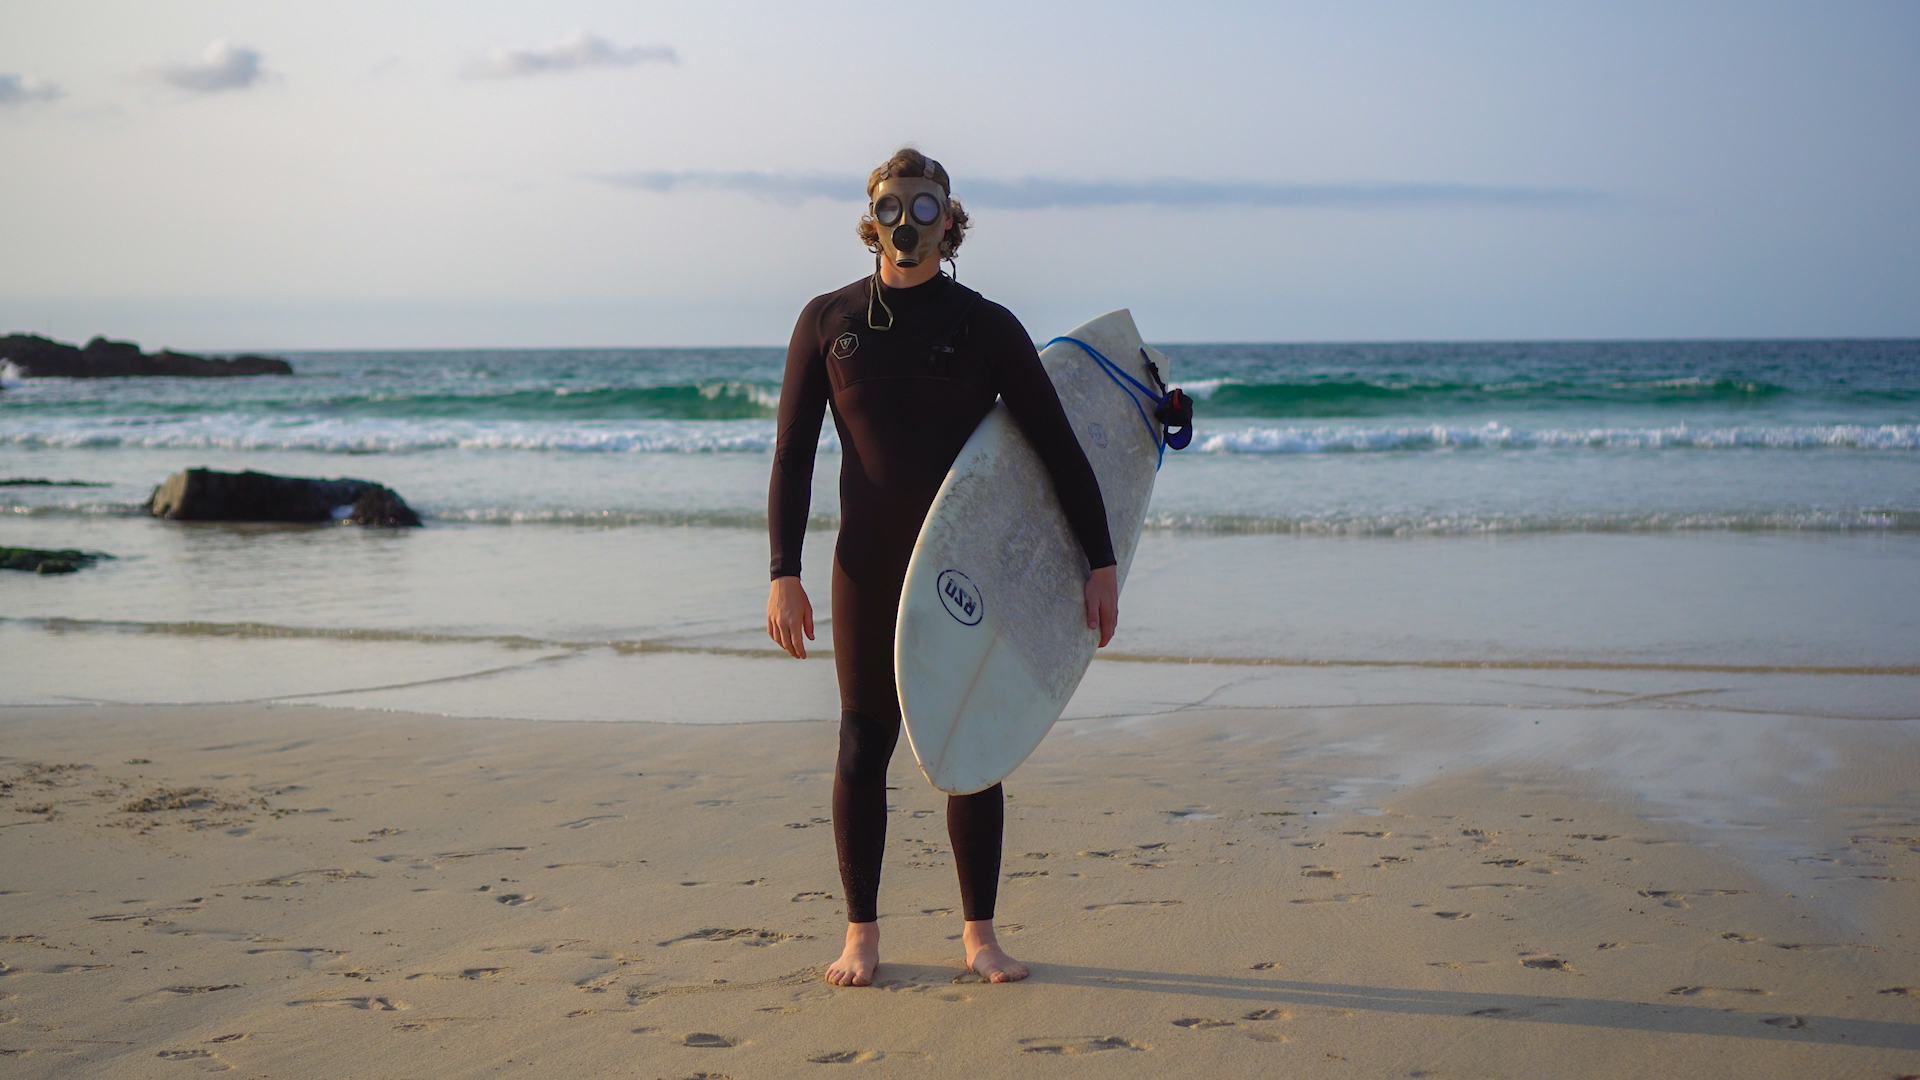 Surfer with a gas mask on